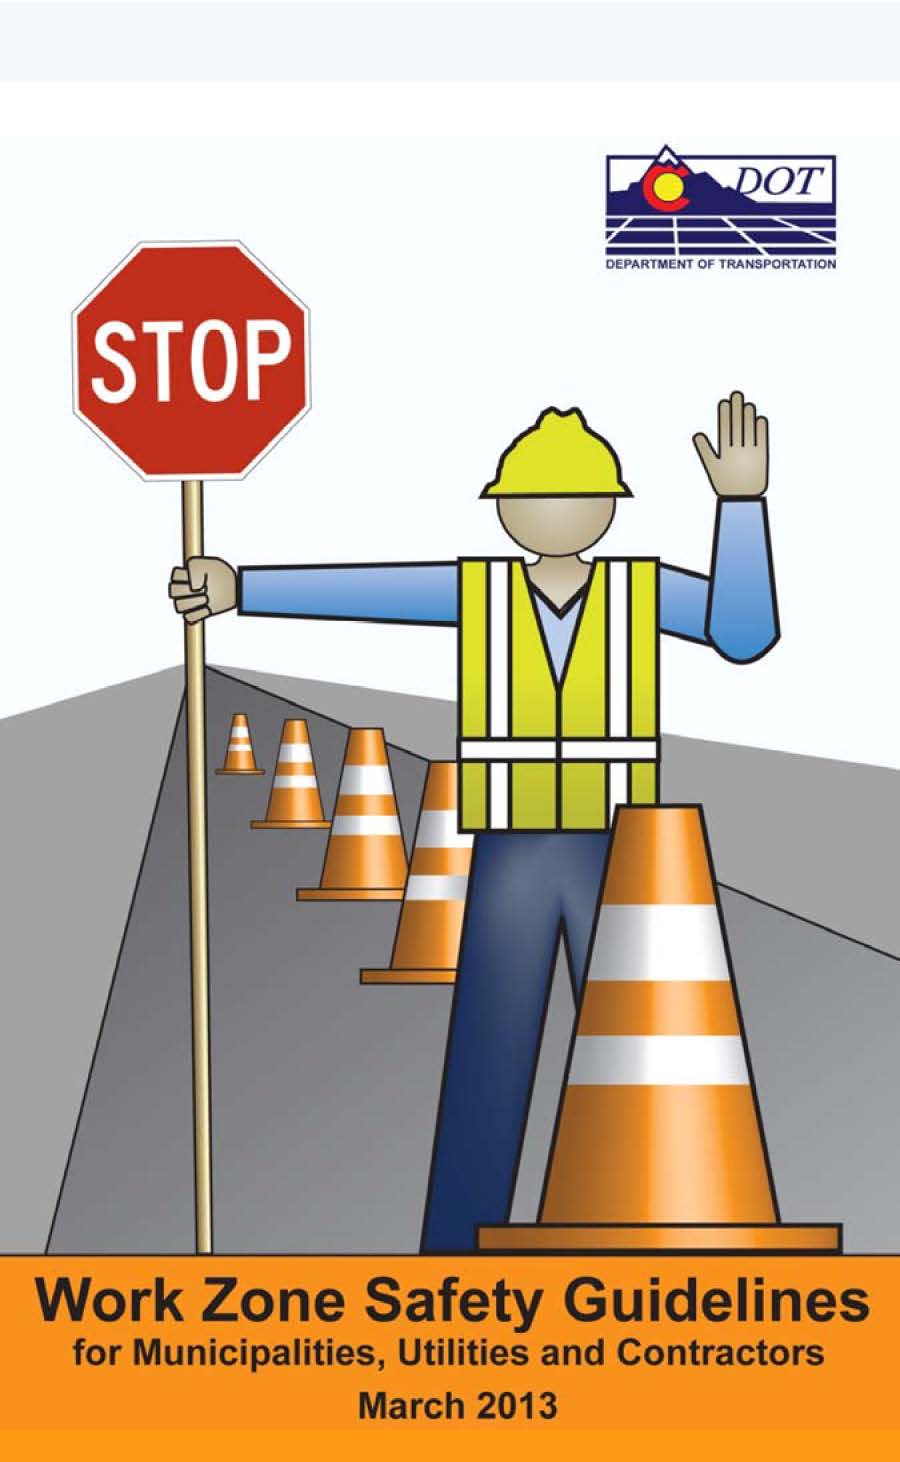 Work Zone Safety Guidelines Flip Book detail image